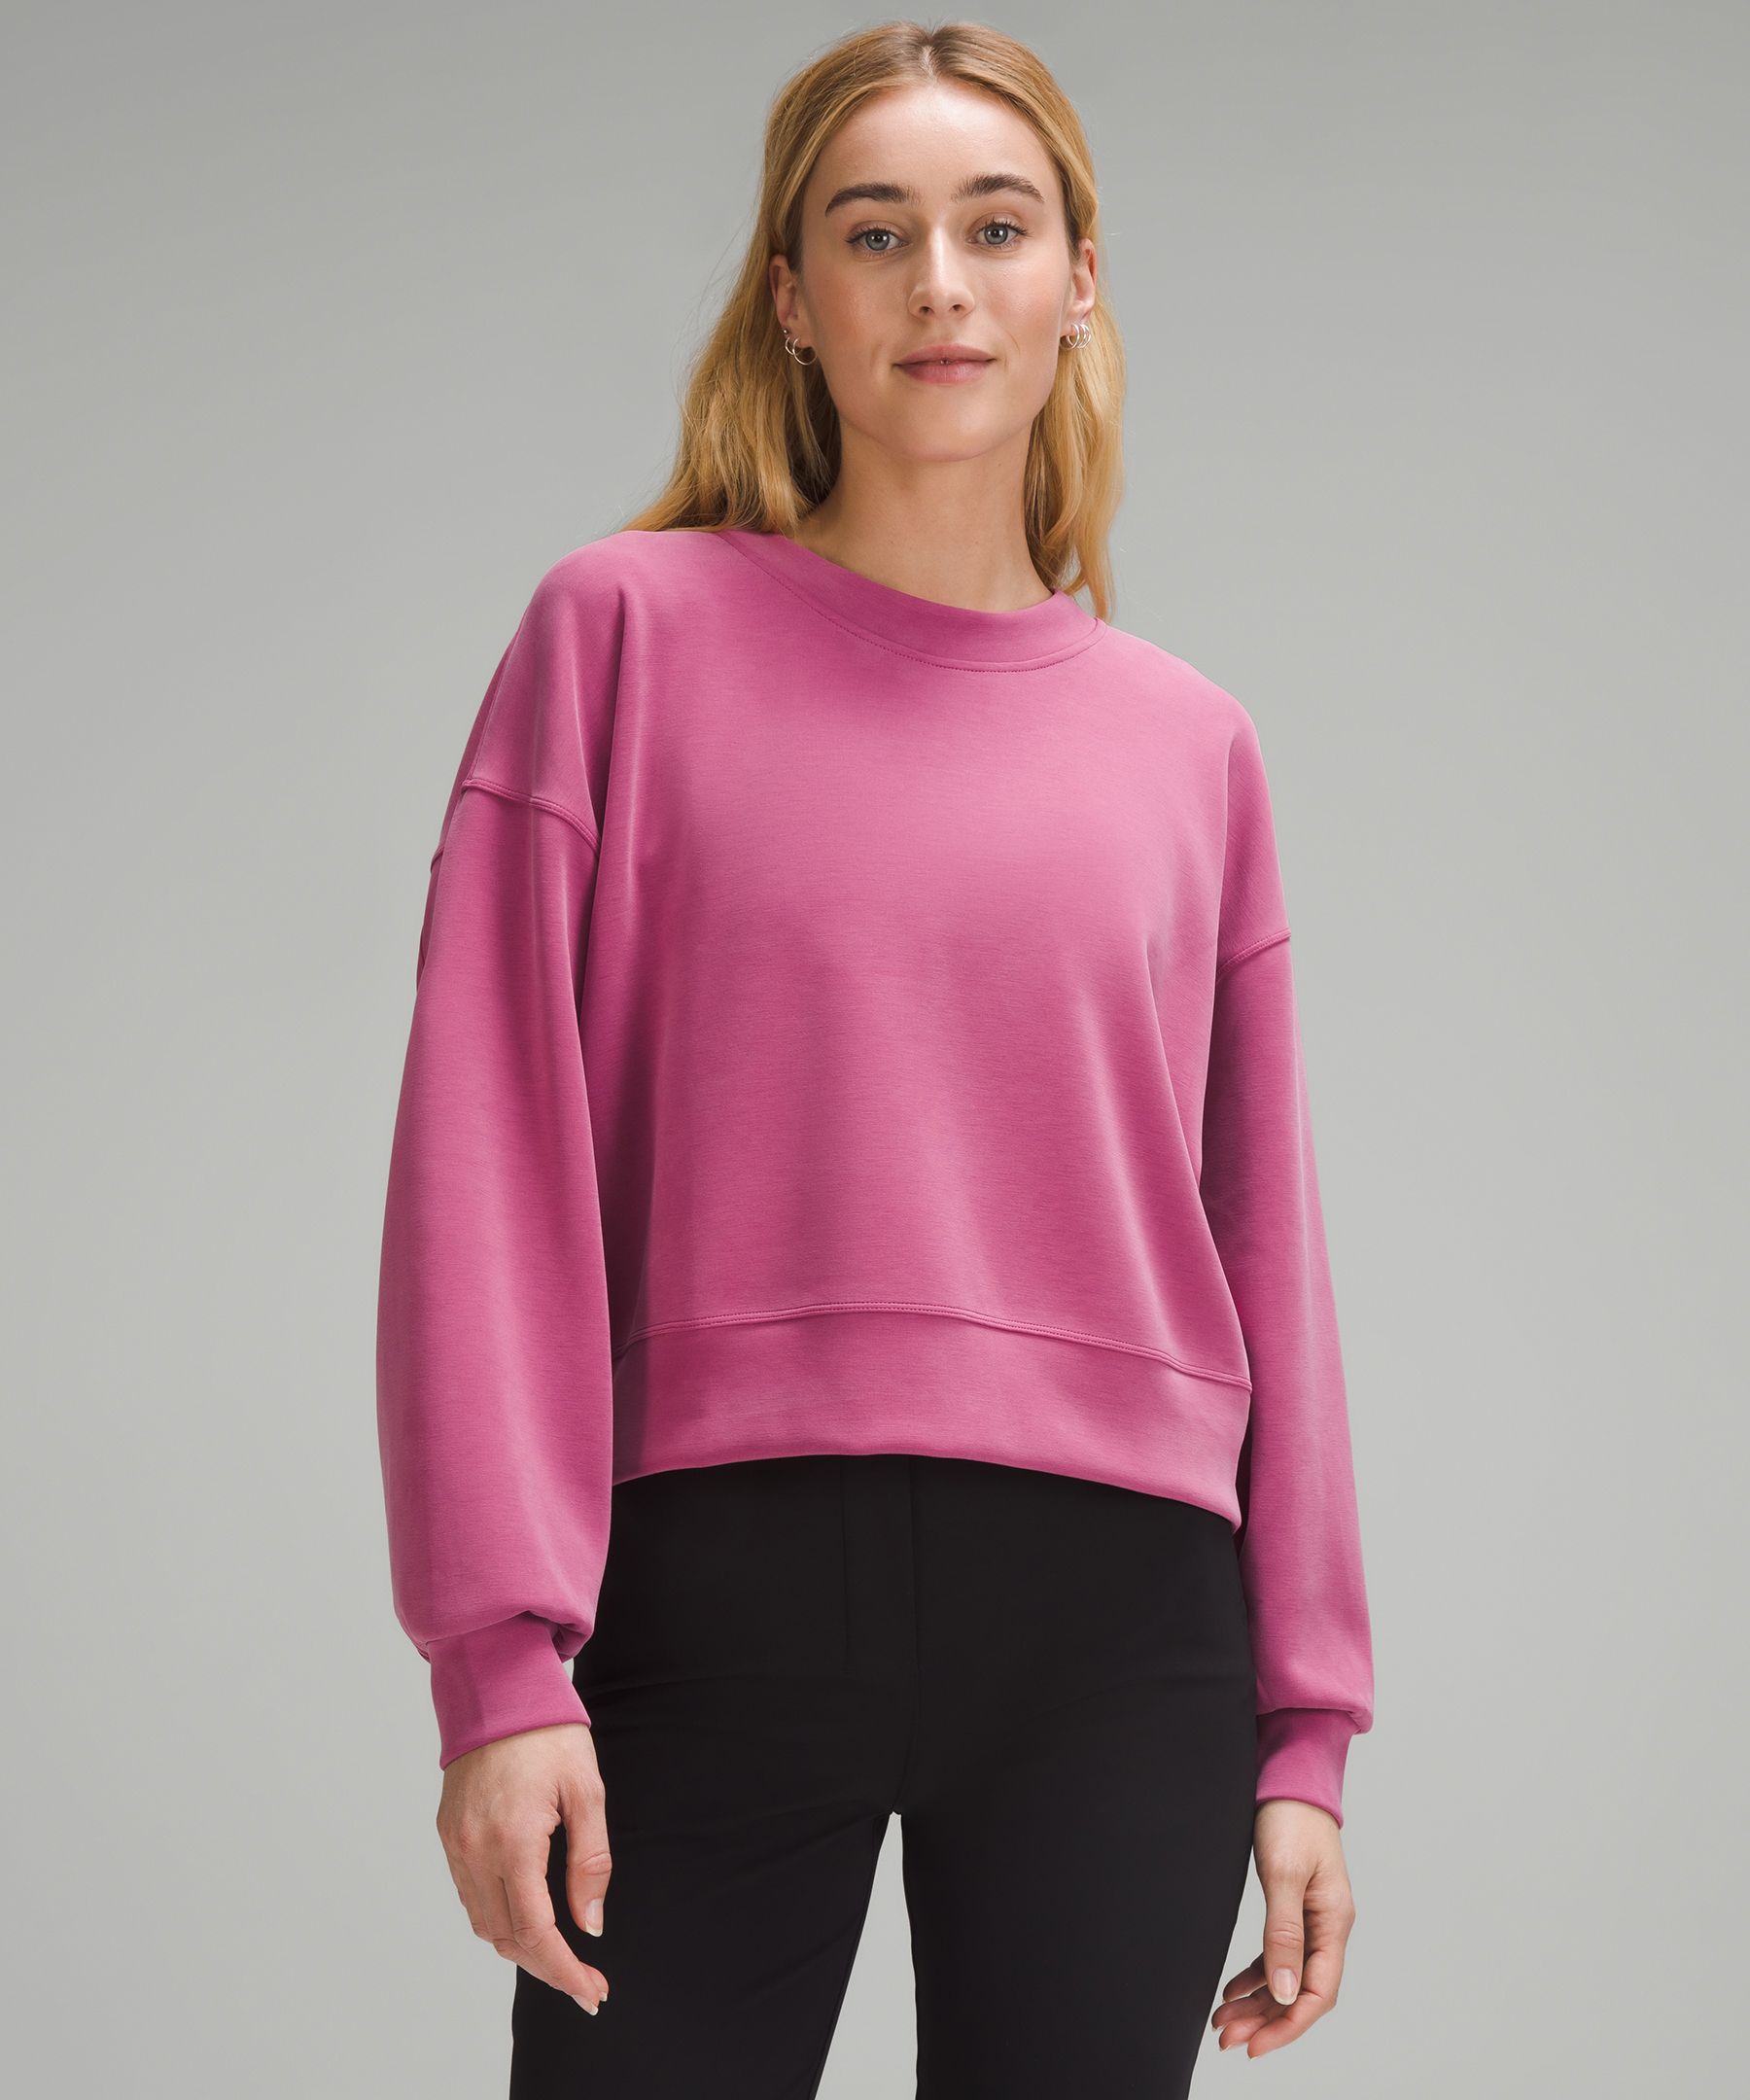 online offers NWT Lululemon Athletica Warm Down Crew Neck Velour Top Cassis  8